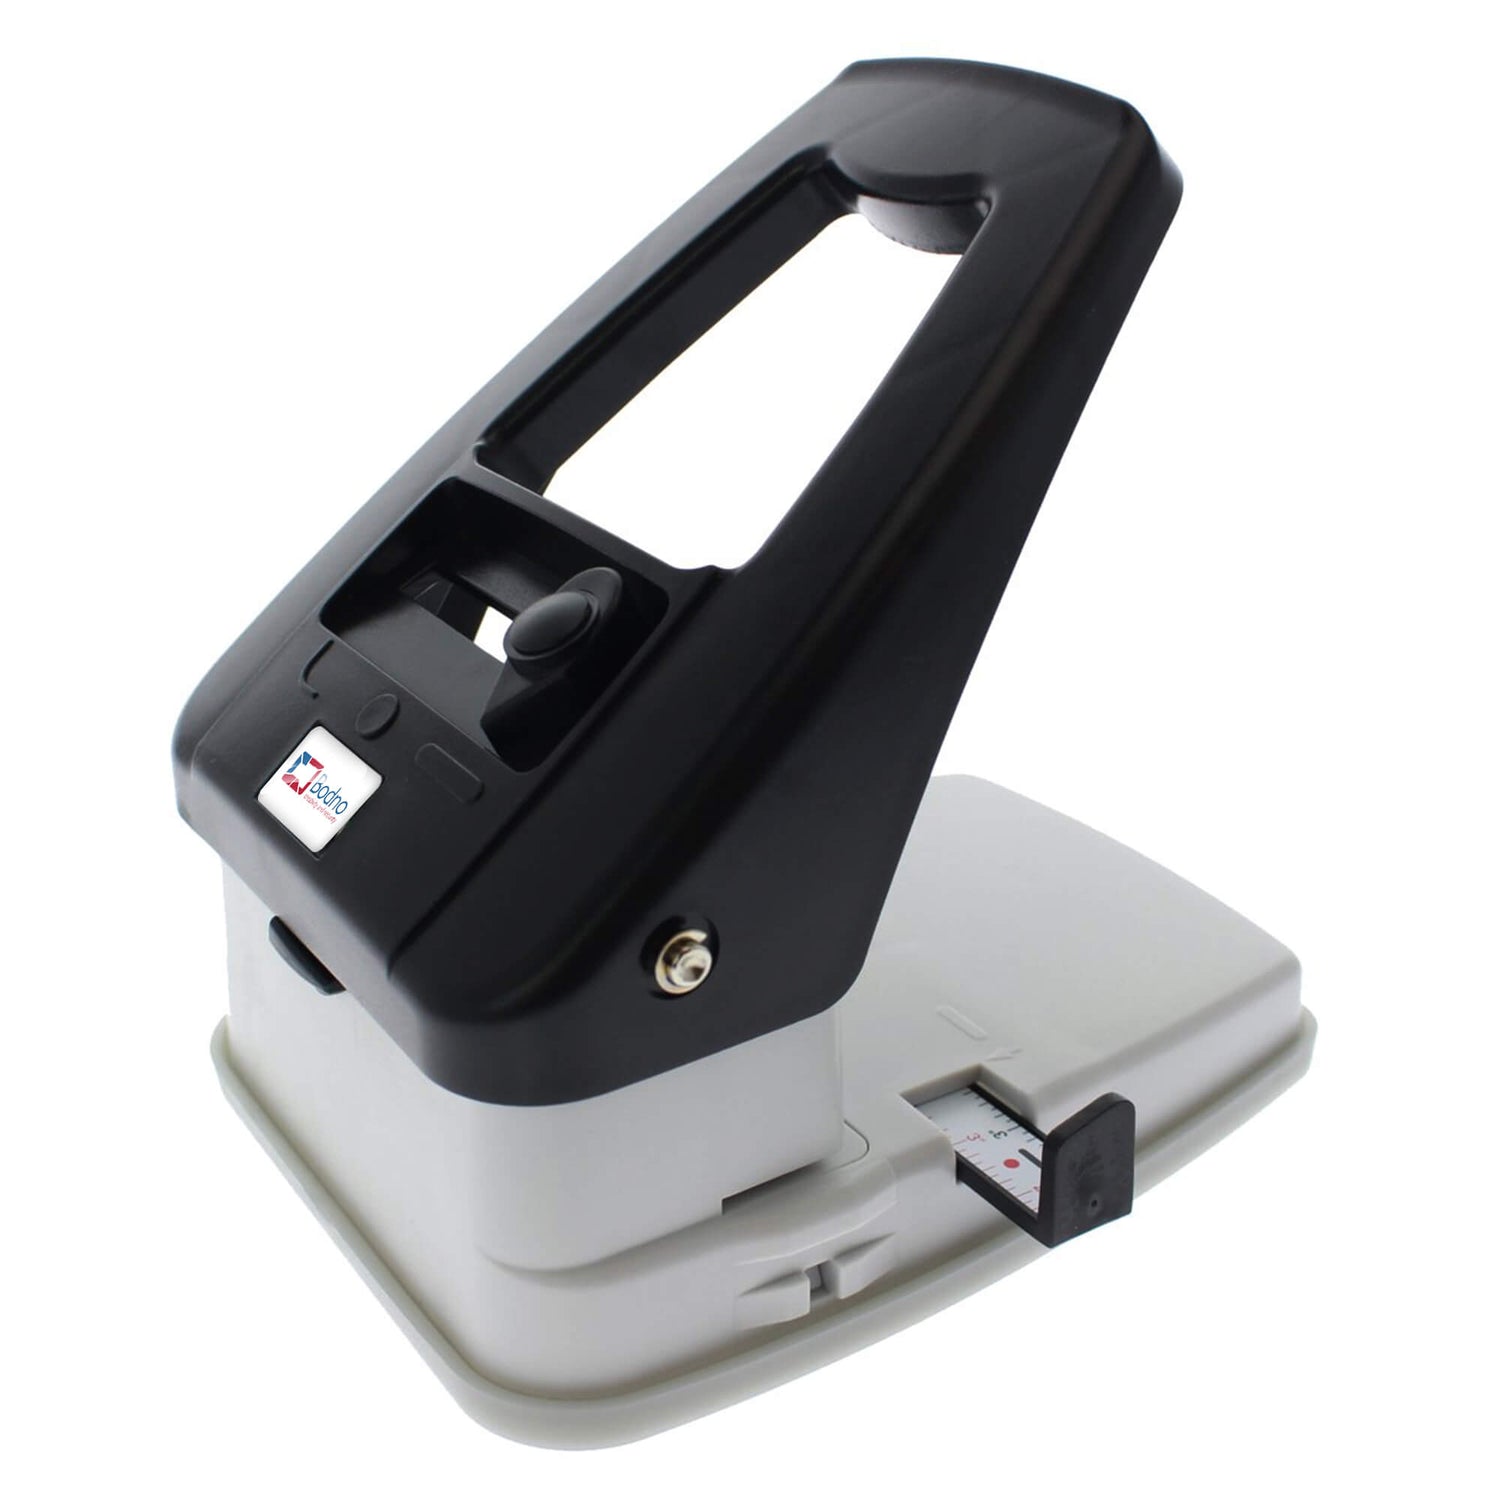 Slot Punches for ID Card Printers